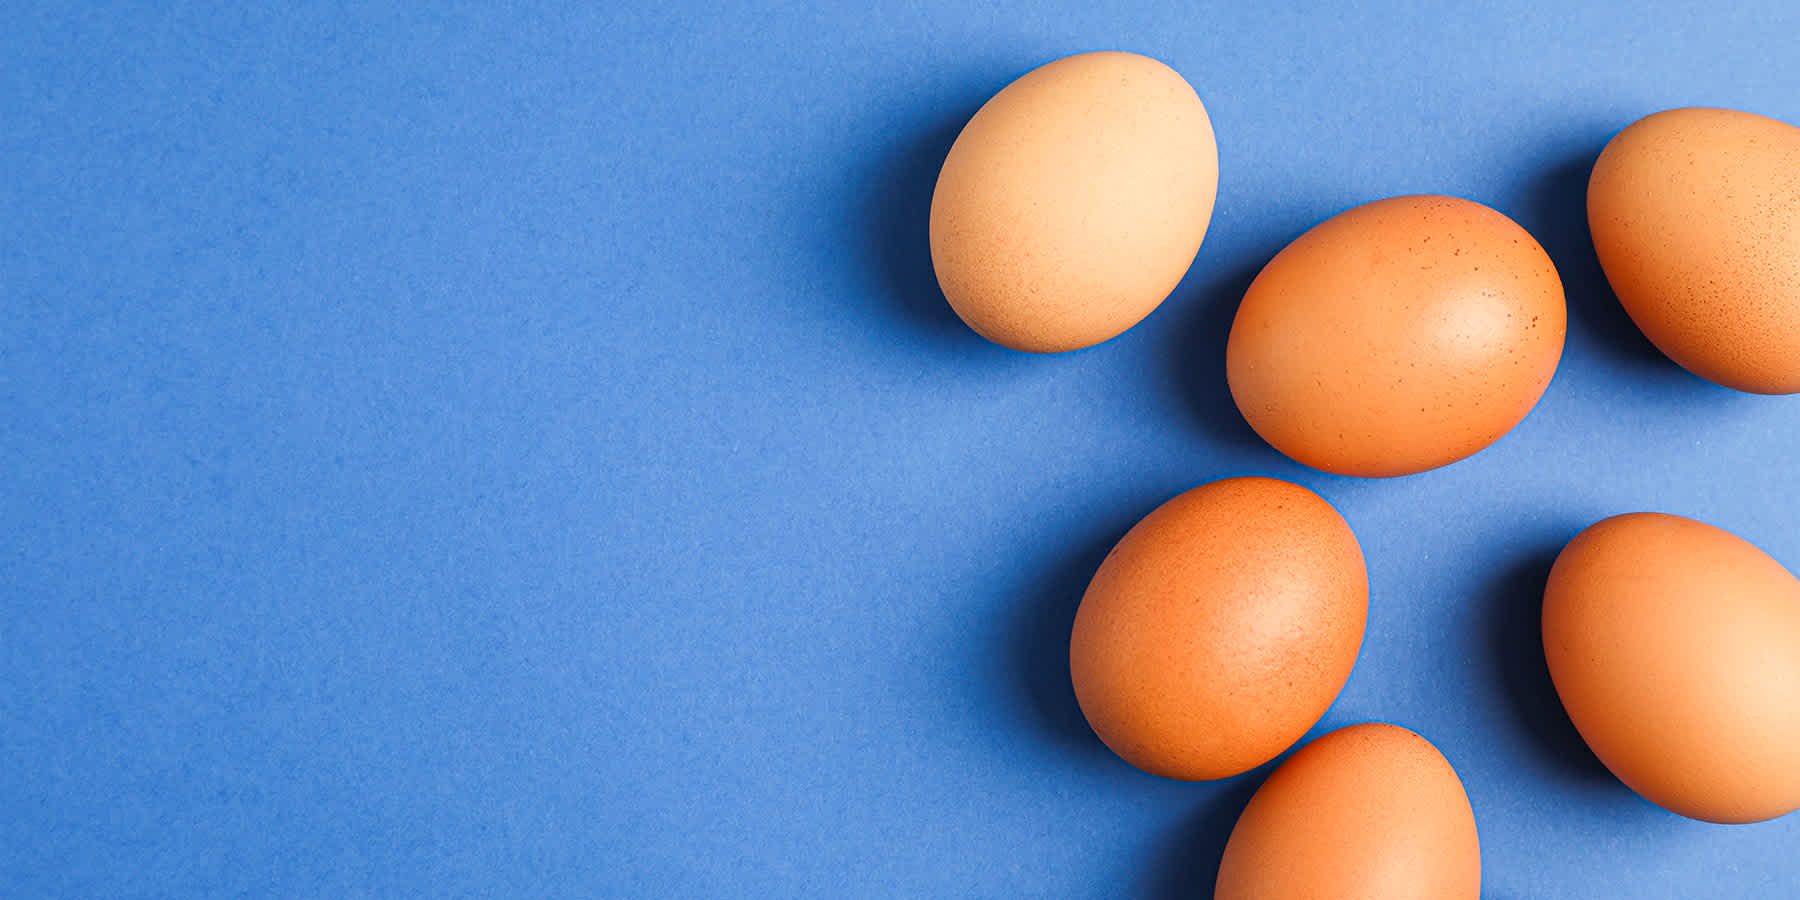 Group of eggs against a blue background